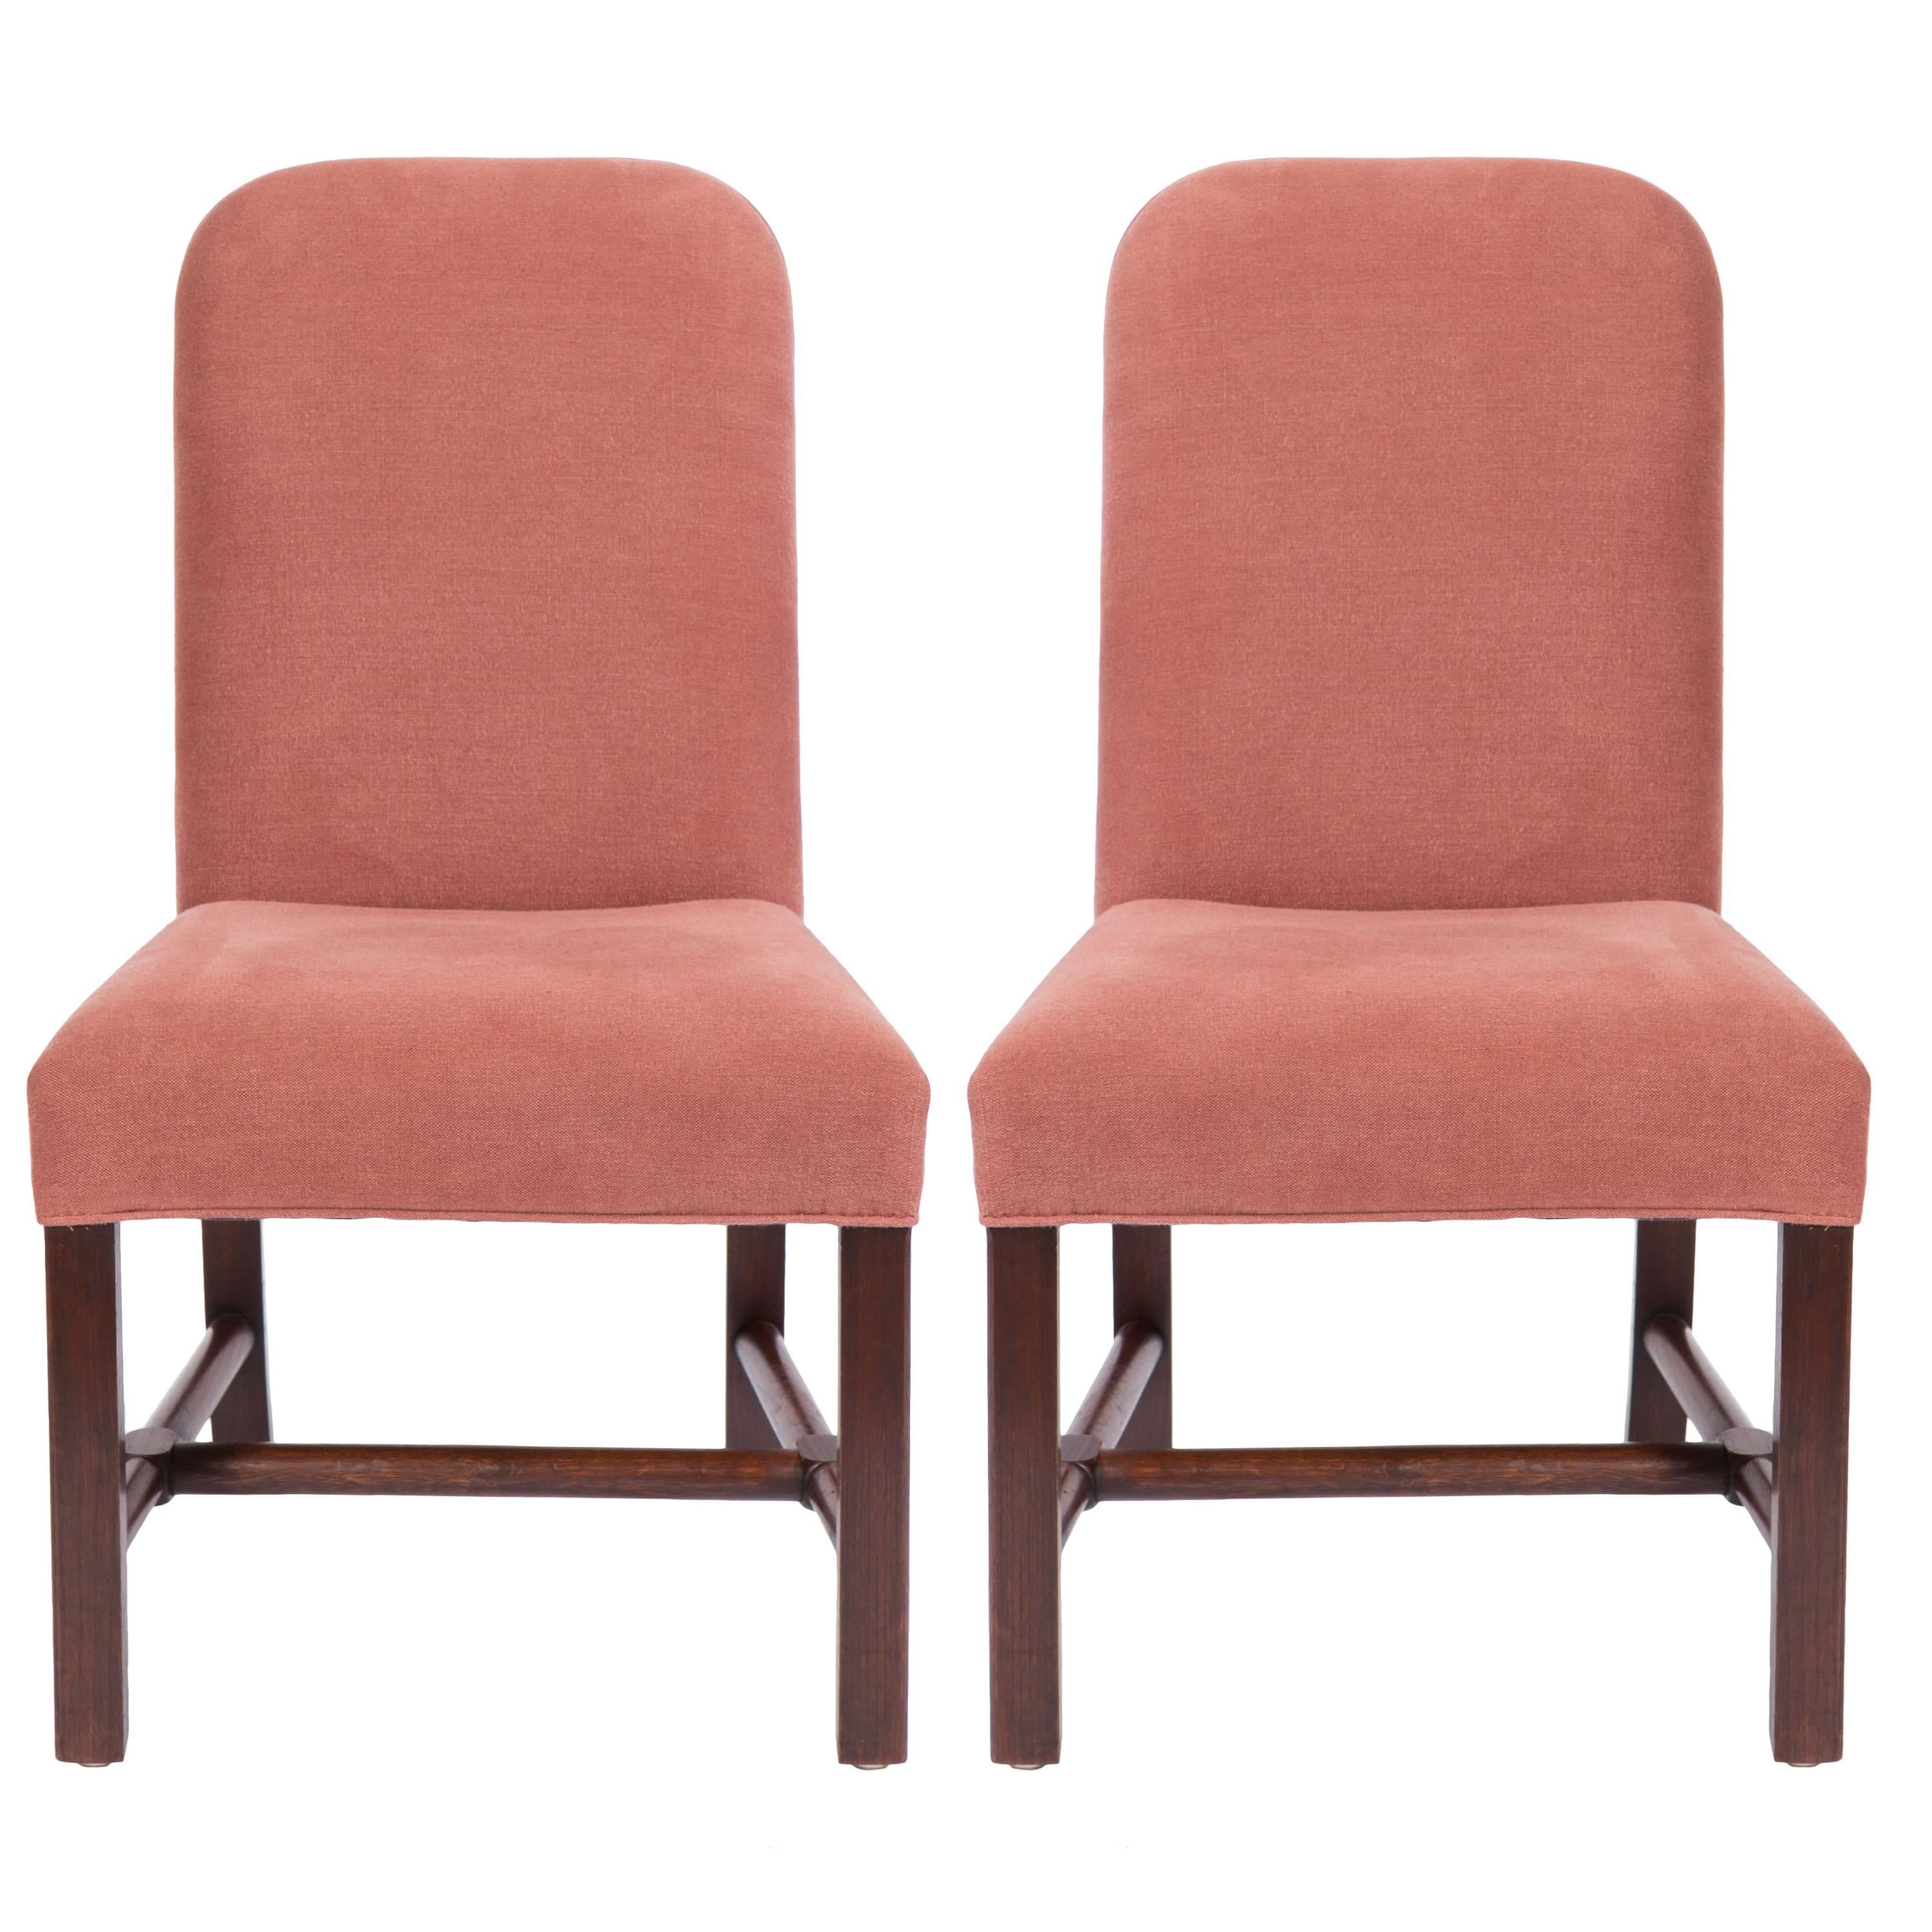 Pair of Custom Made Side Chairs from Axel Vervoordt Covered in Linen